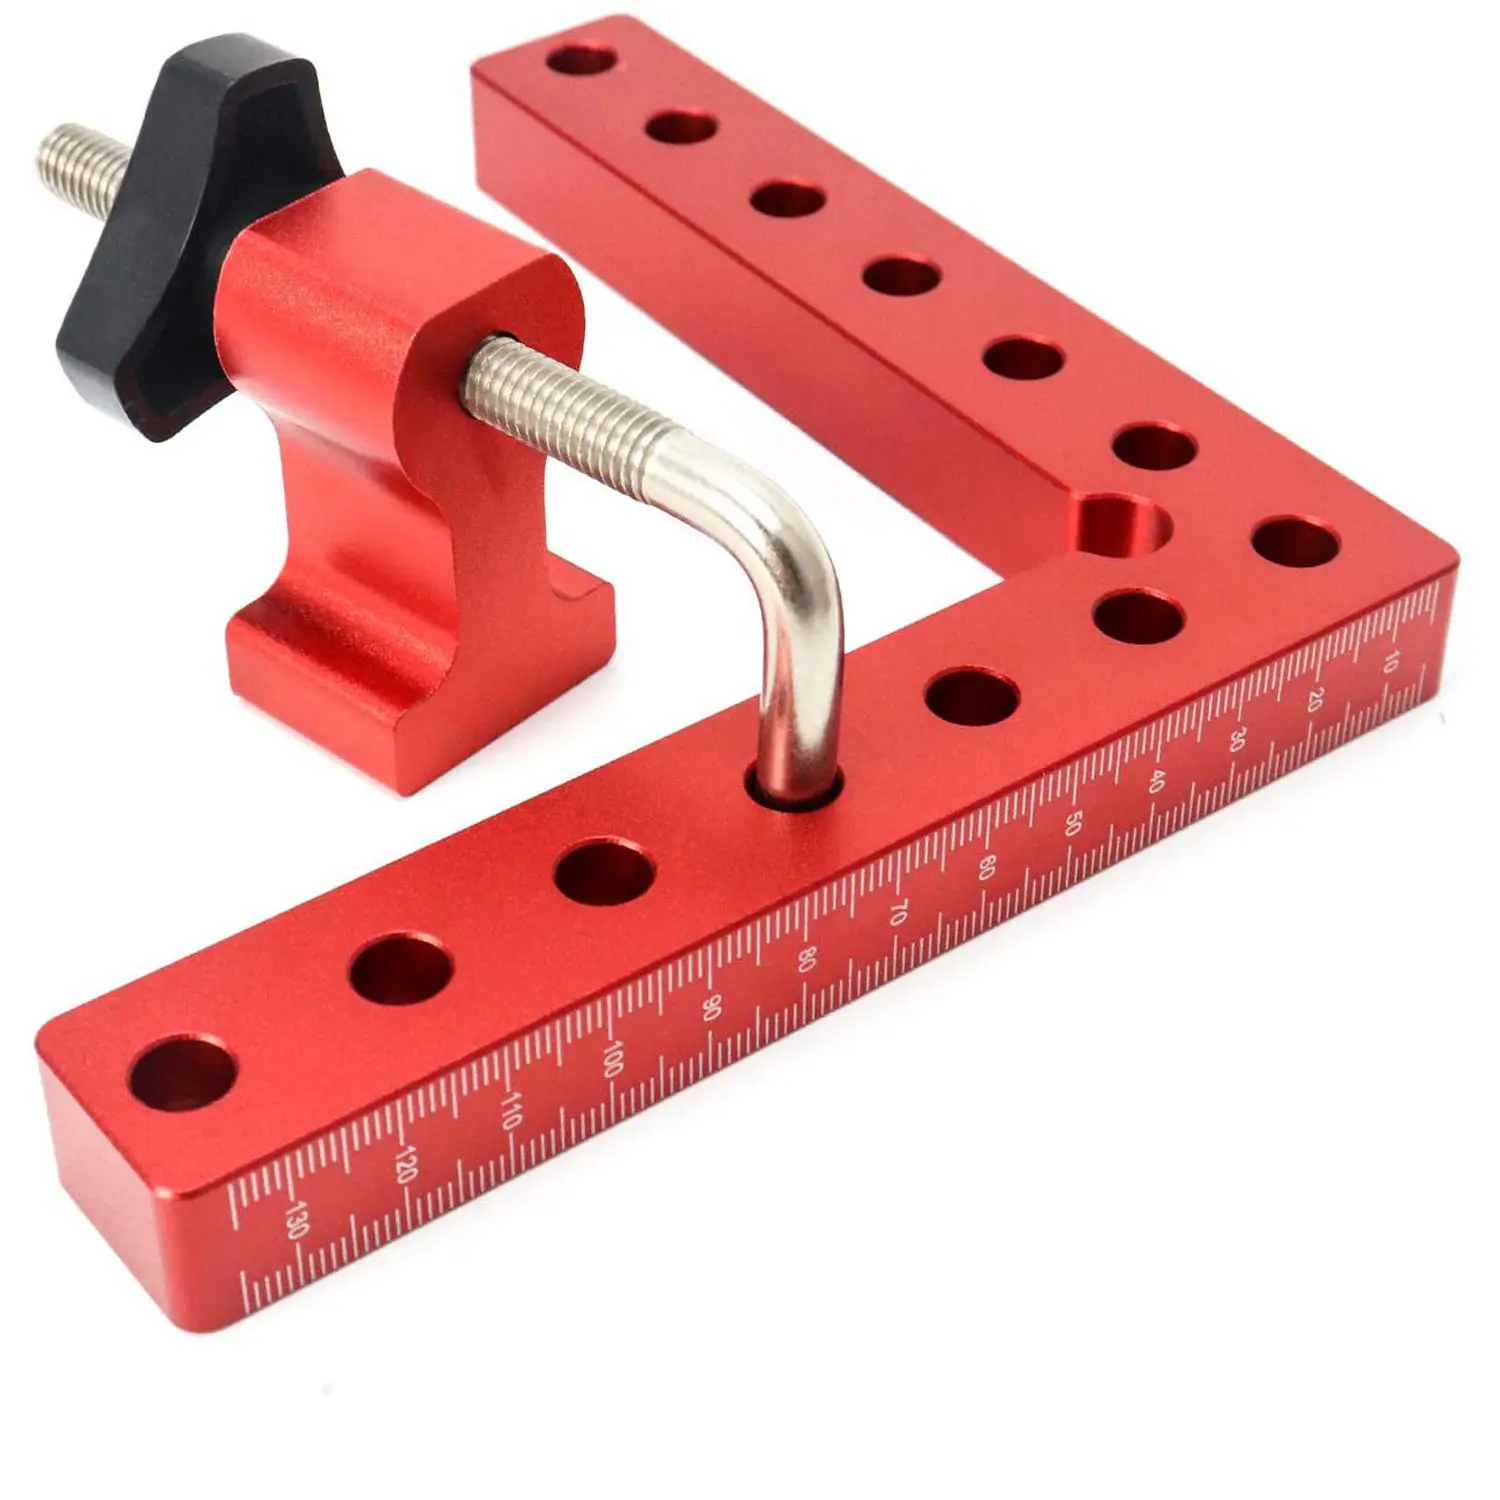 90 degree angle clamp Squares L Shaped Right Angle CTool Corner Clamping Square for Picture Frame Box Cabinets Drawer